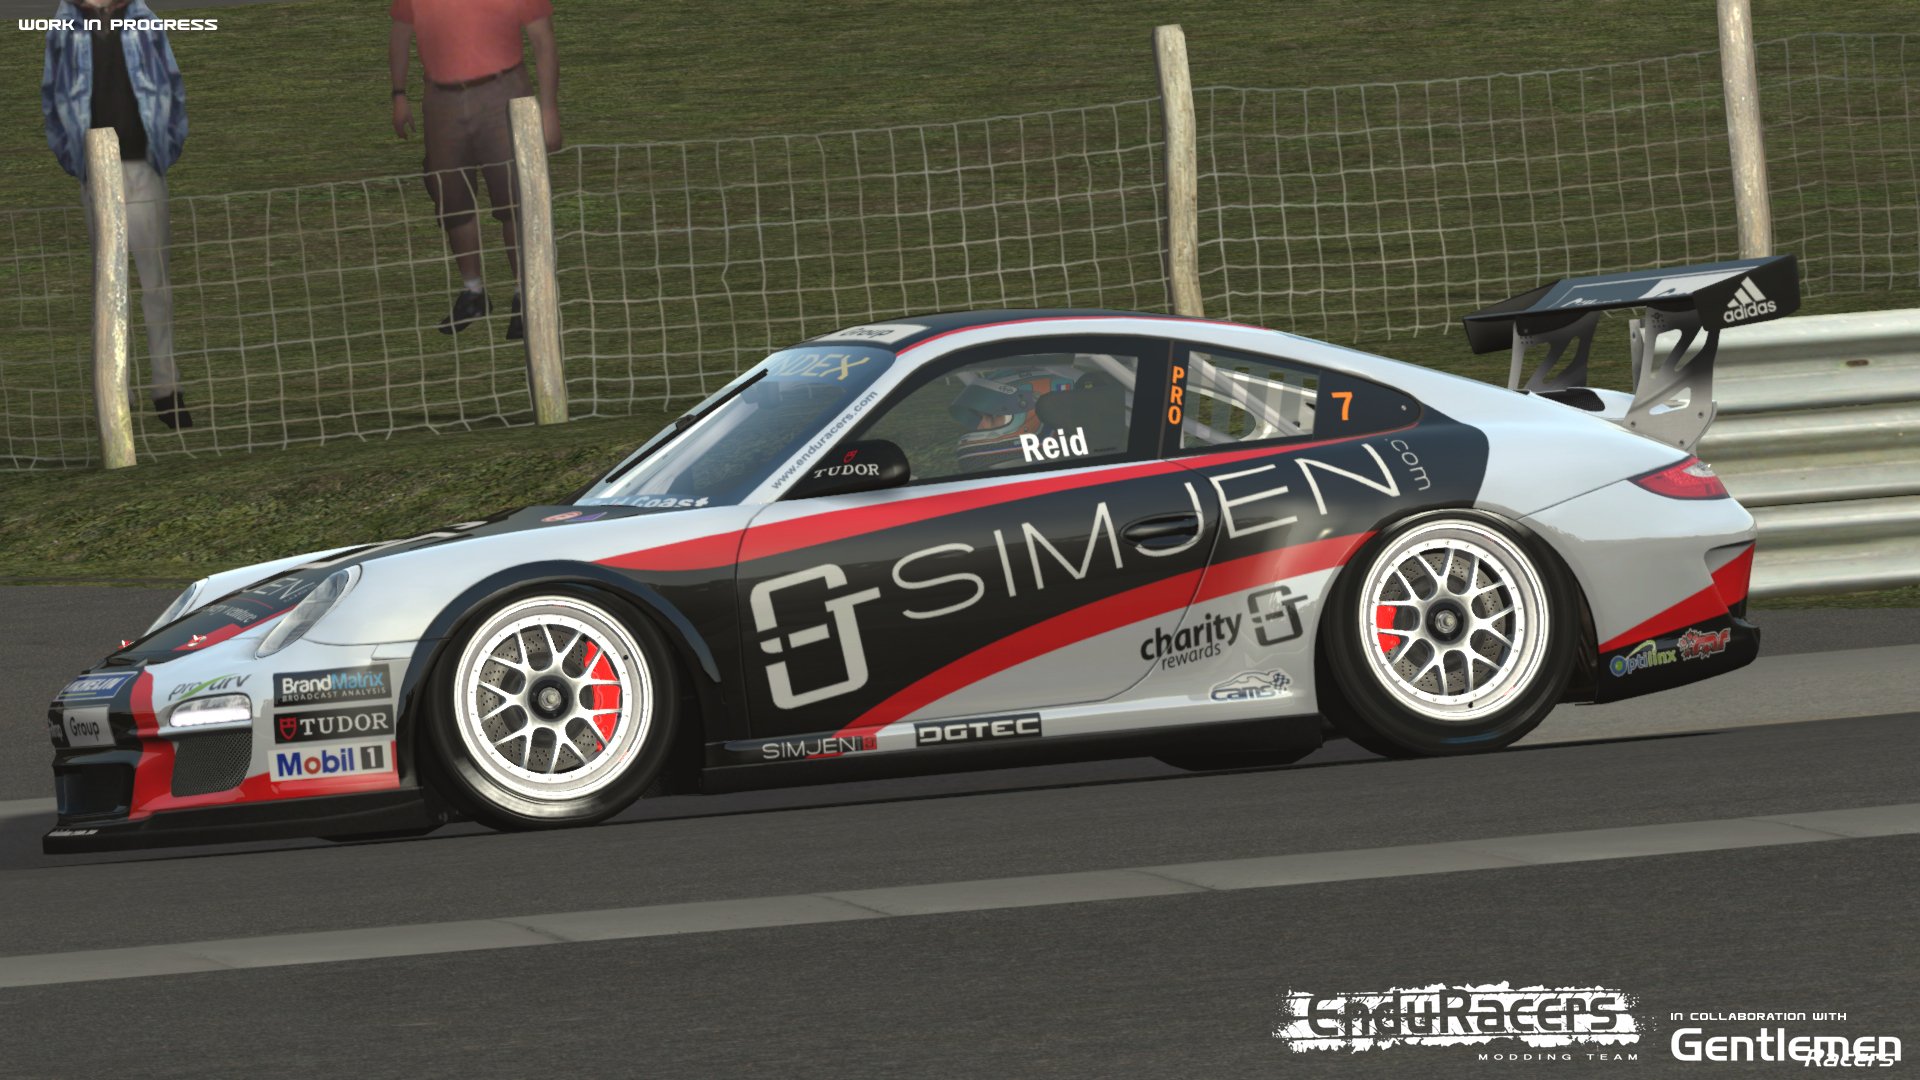 More information about "rFactor 2: Flat6 Series mod v4.0 by Enduracers"